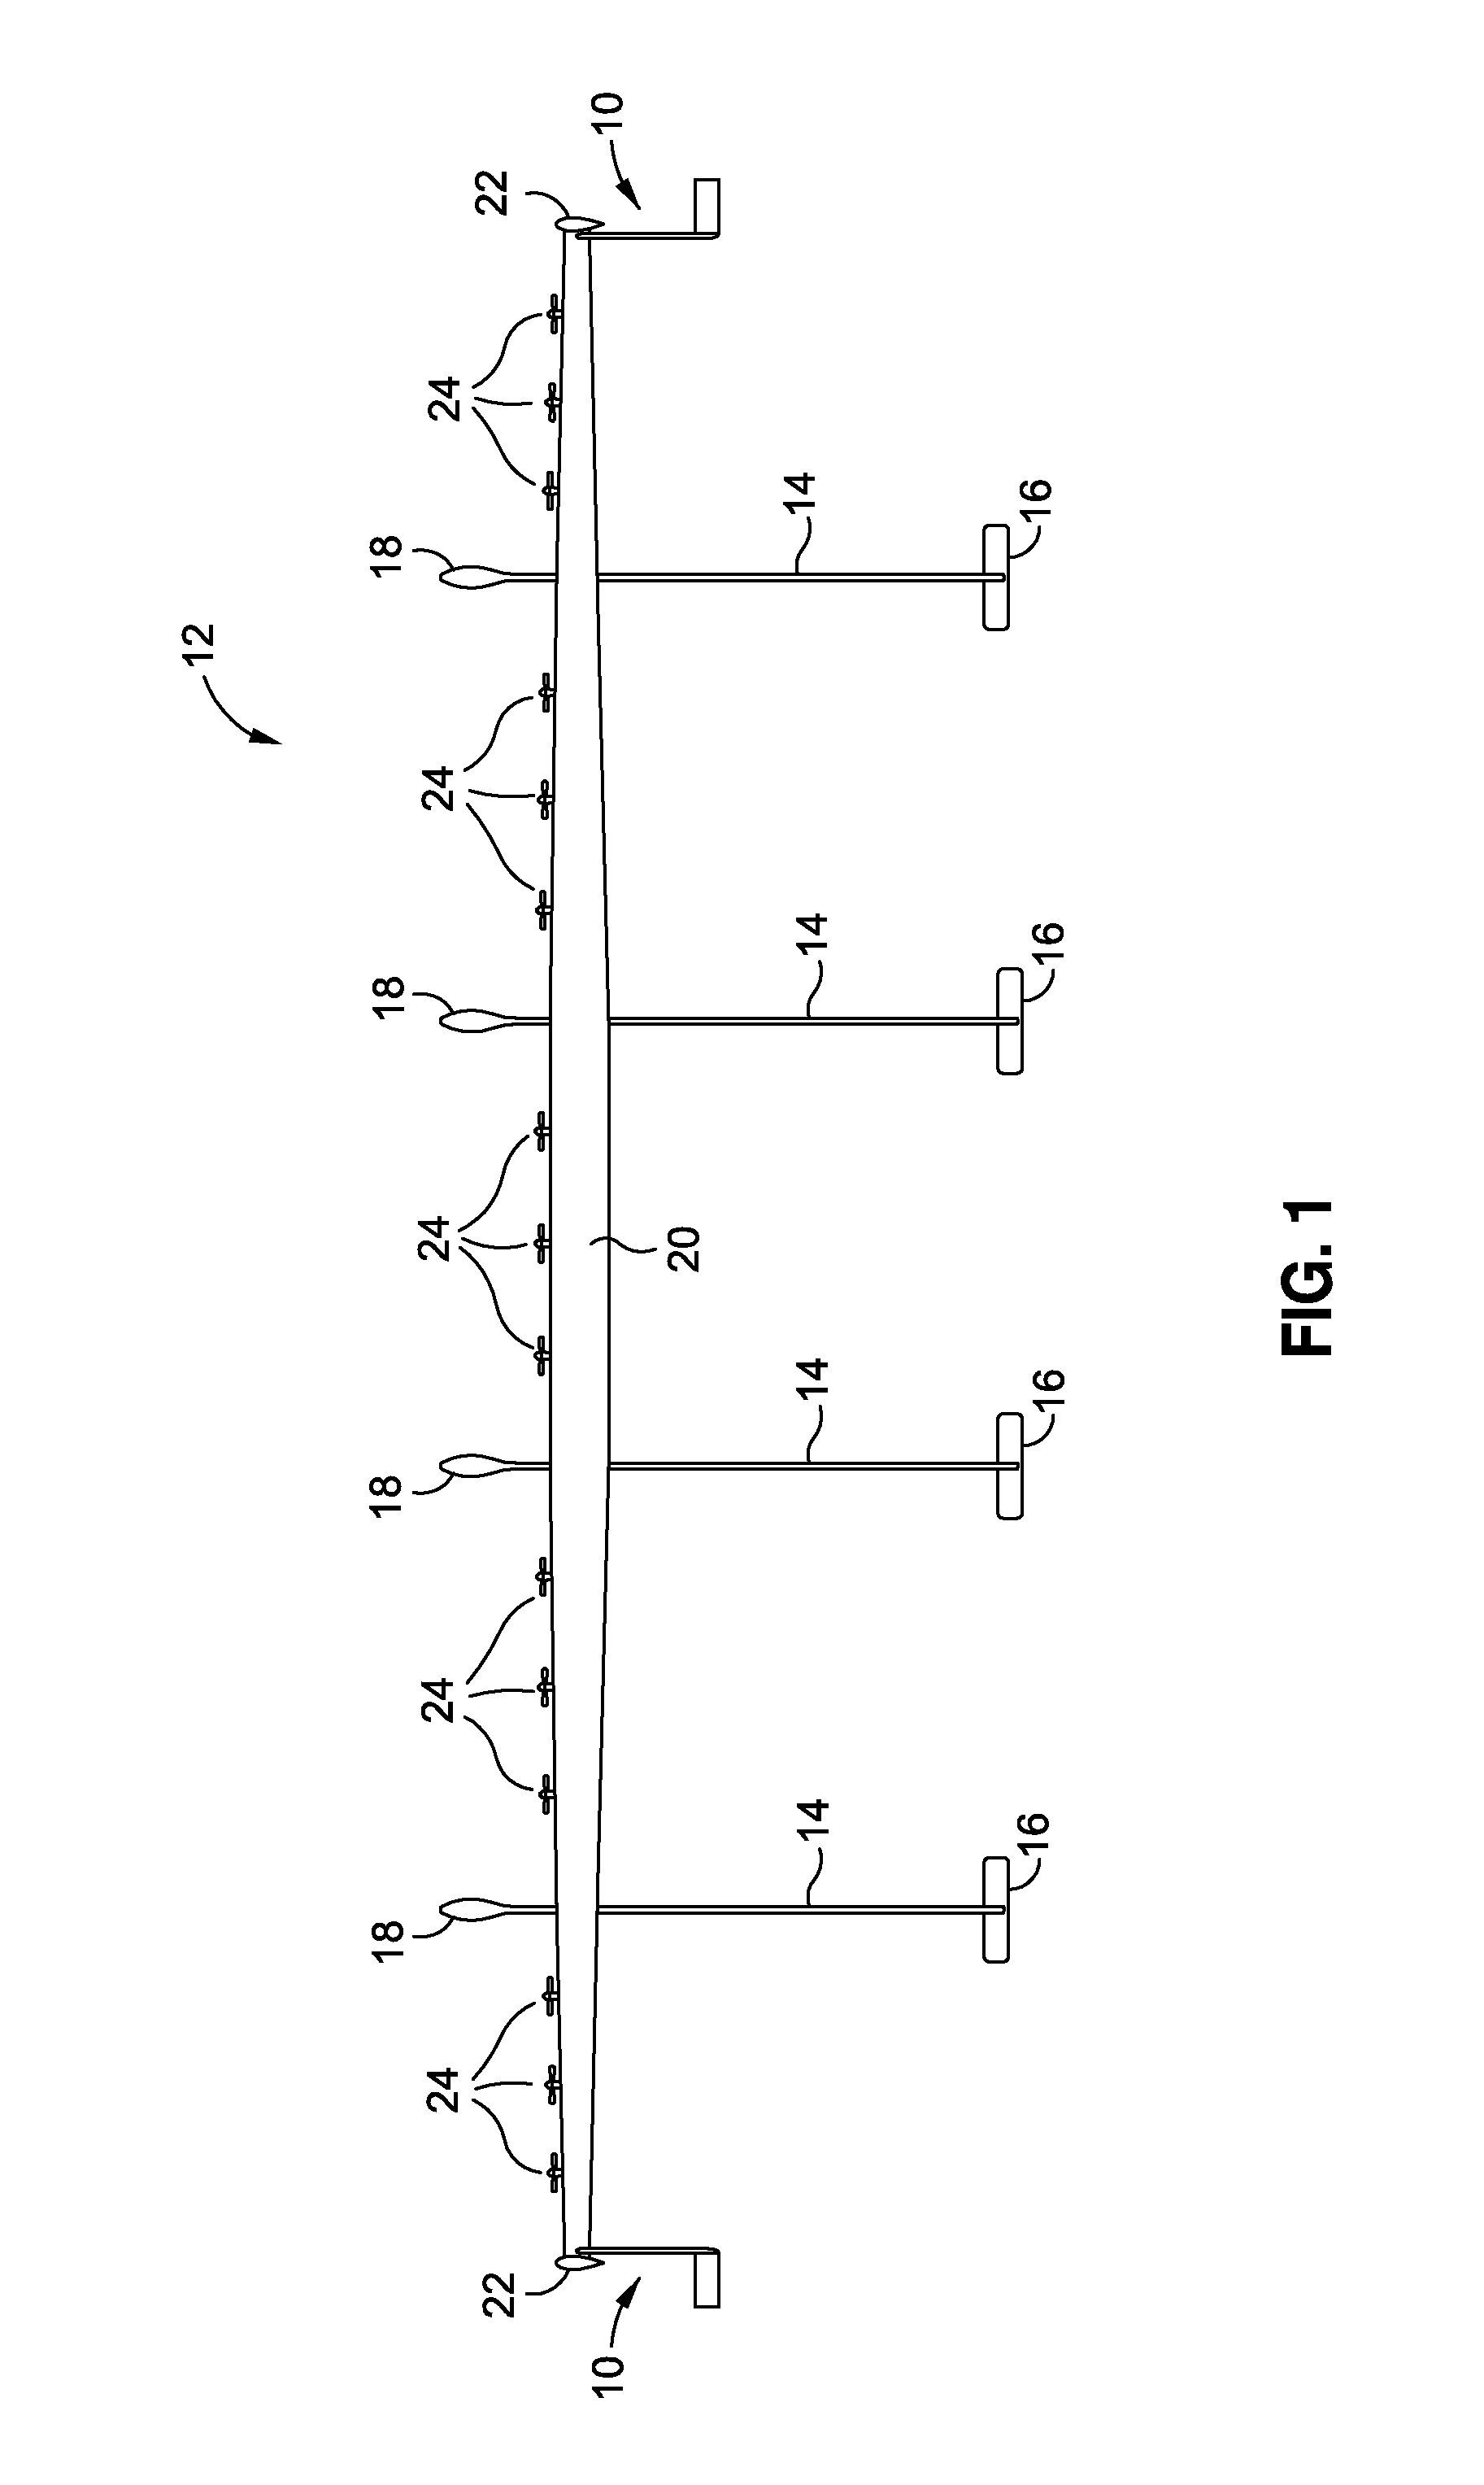 Wing tip load alleviation device and method